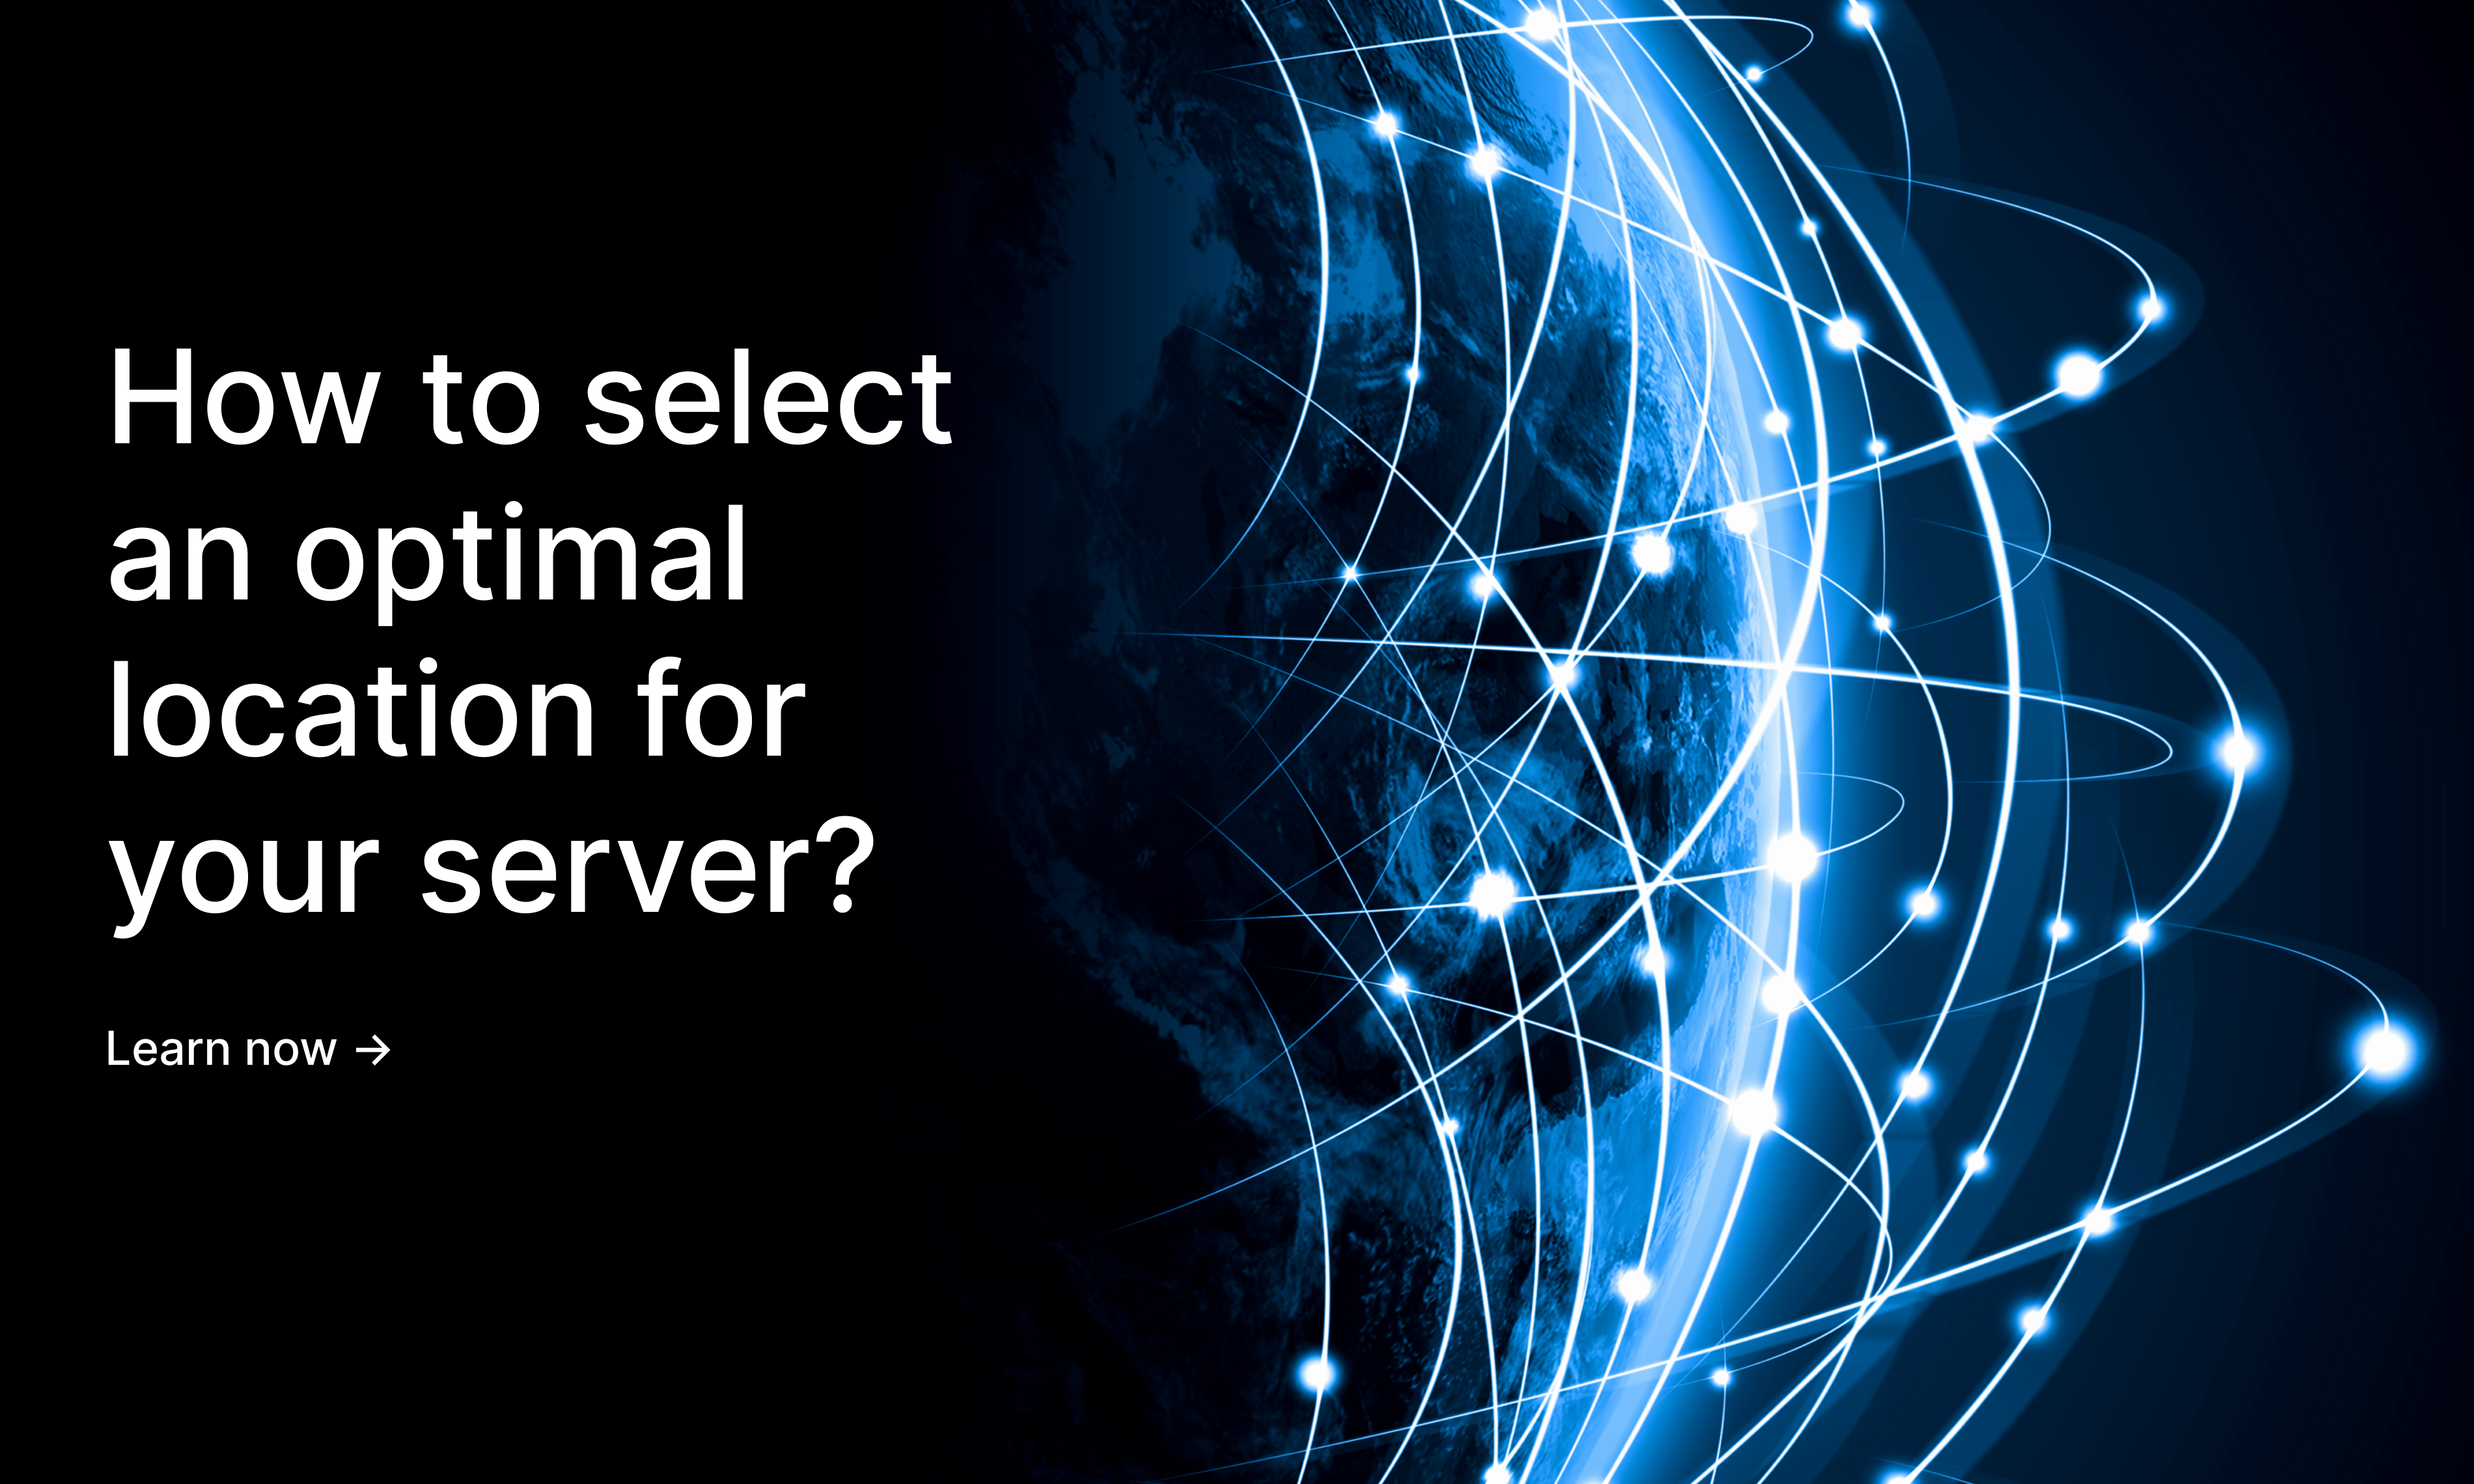 How to select an optimal location for your server?